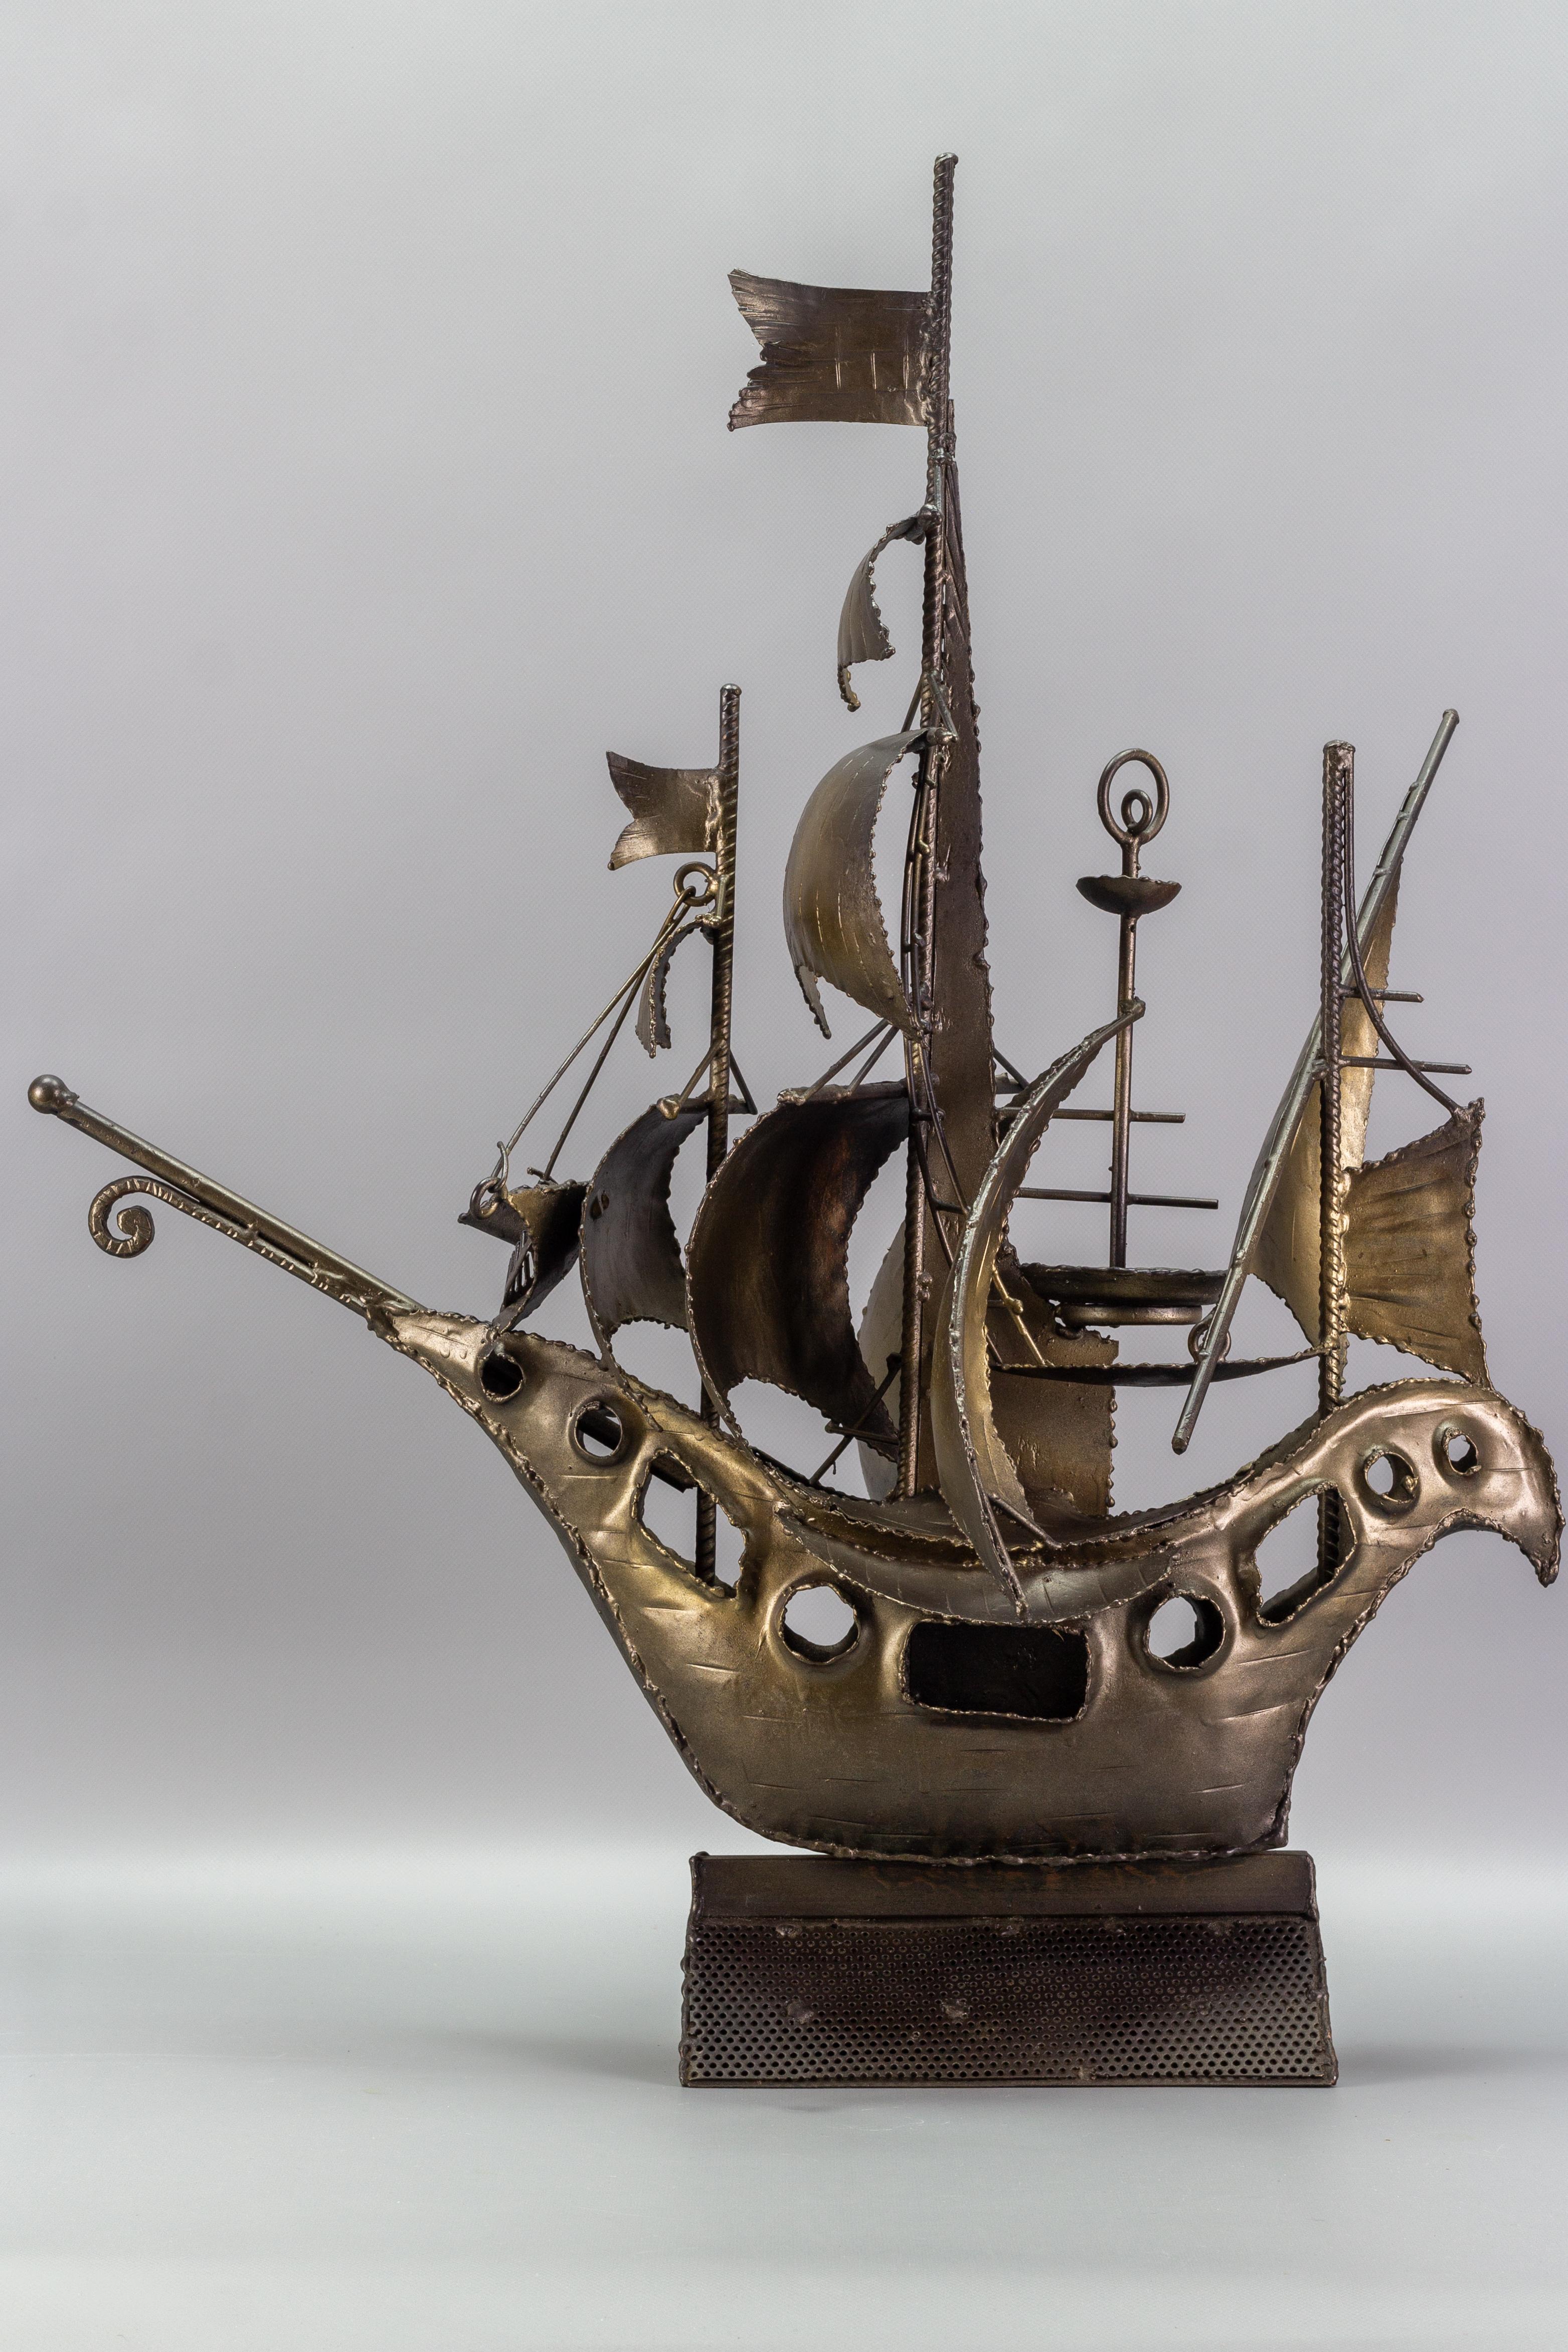 Unique and very decorative industrial-style sailing ship sculpture made of metal in the 1970s, Germany.
This amazing handcrafted welded metal object is highly decorative, placed on a metal stand that allows to place it for display purposes in any